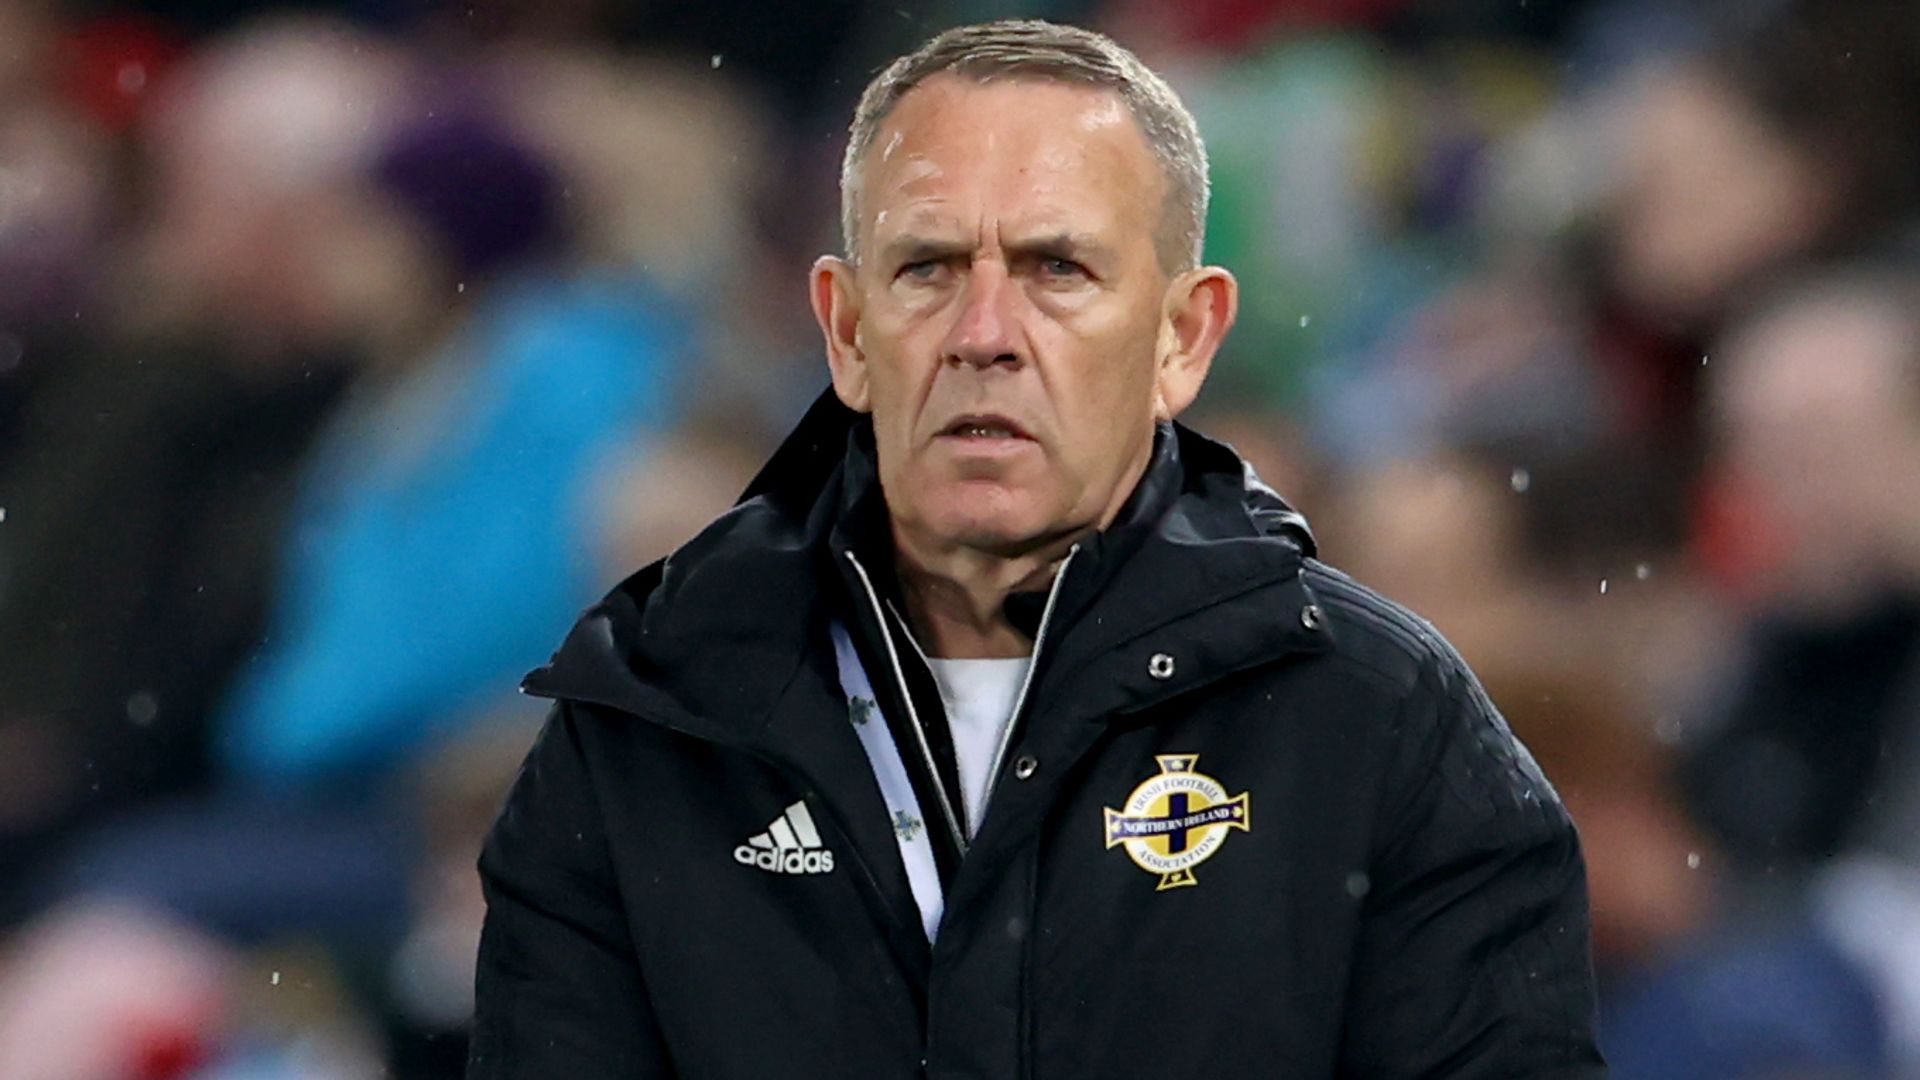 NI players back Shiels after 'women more emotional' comments